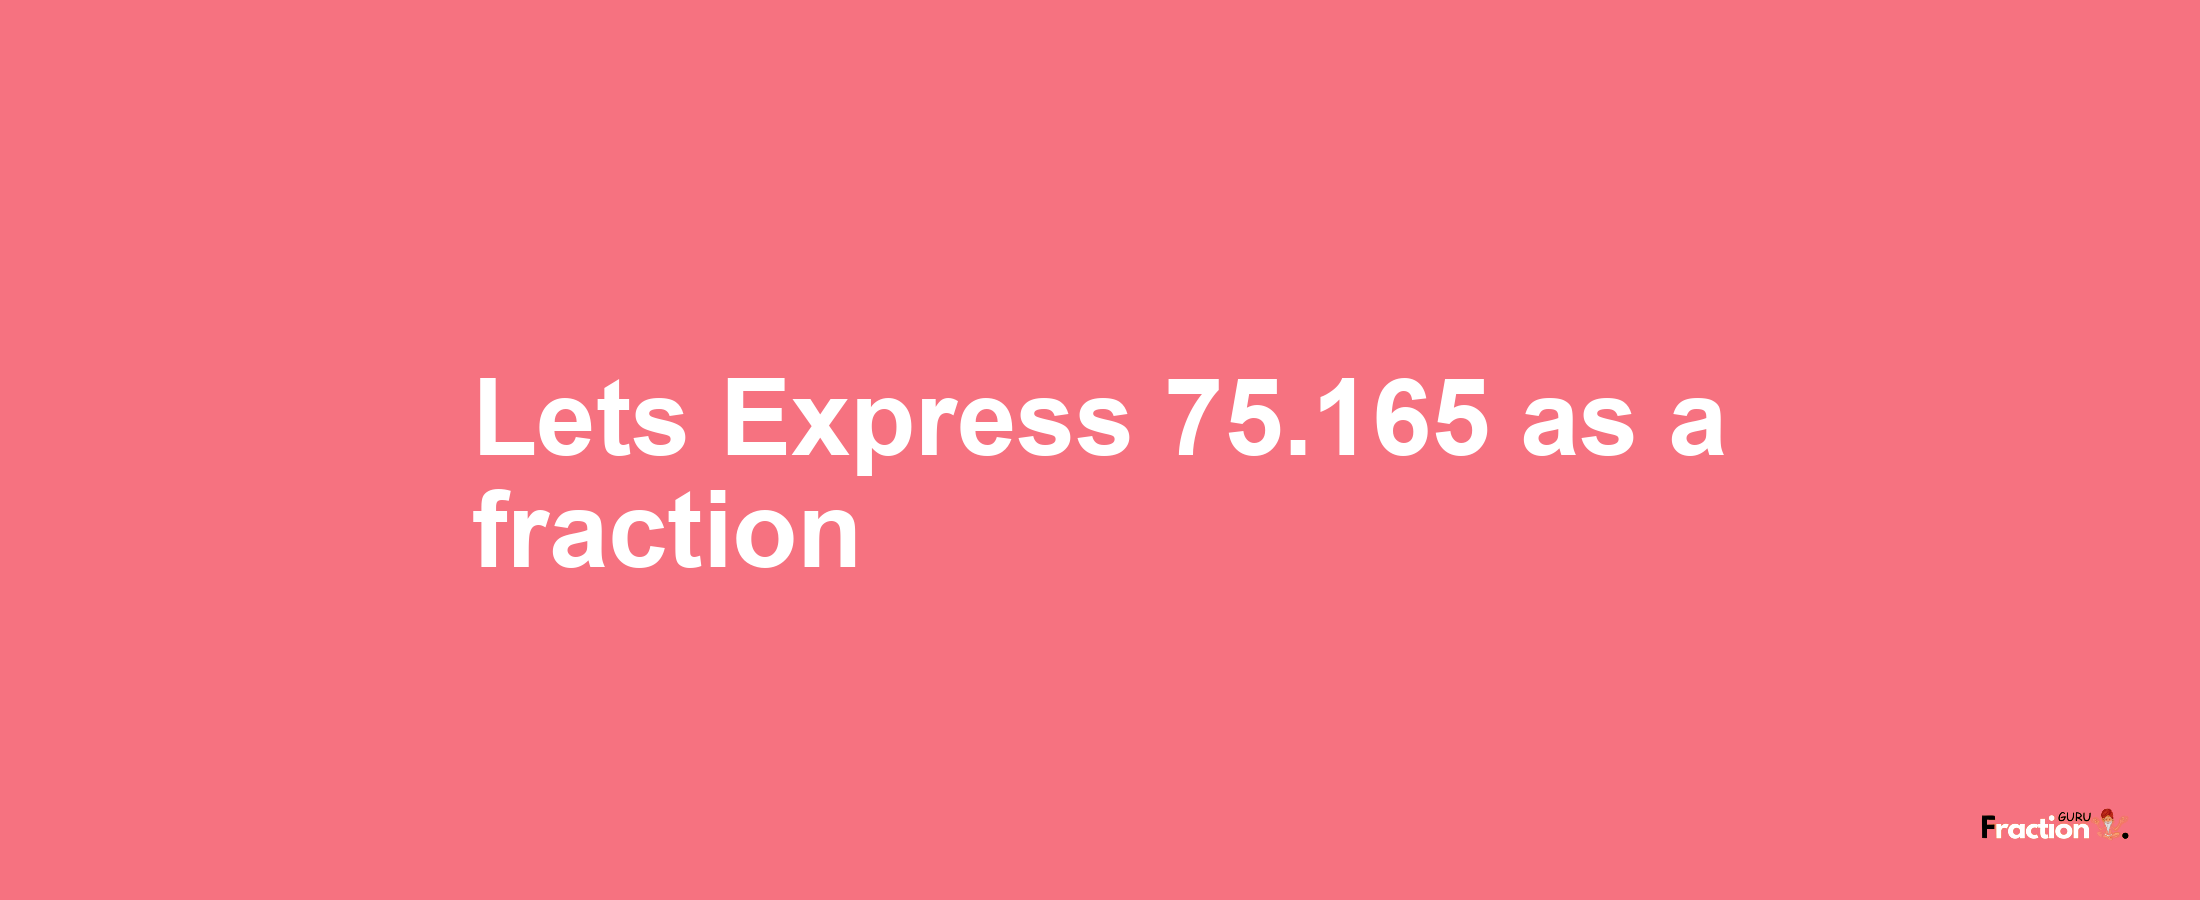 Lets Express 75.165 as afraction